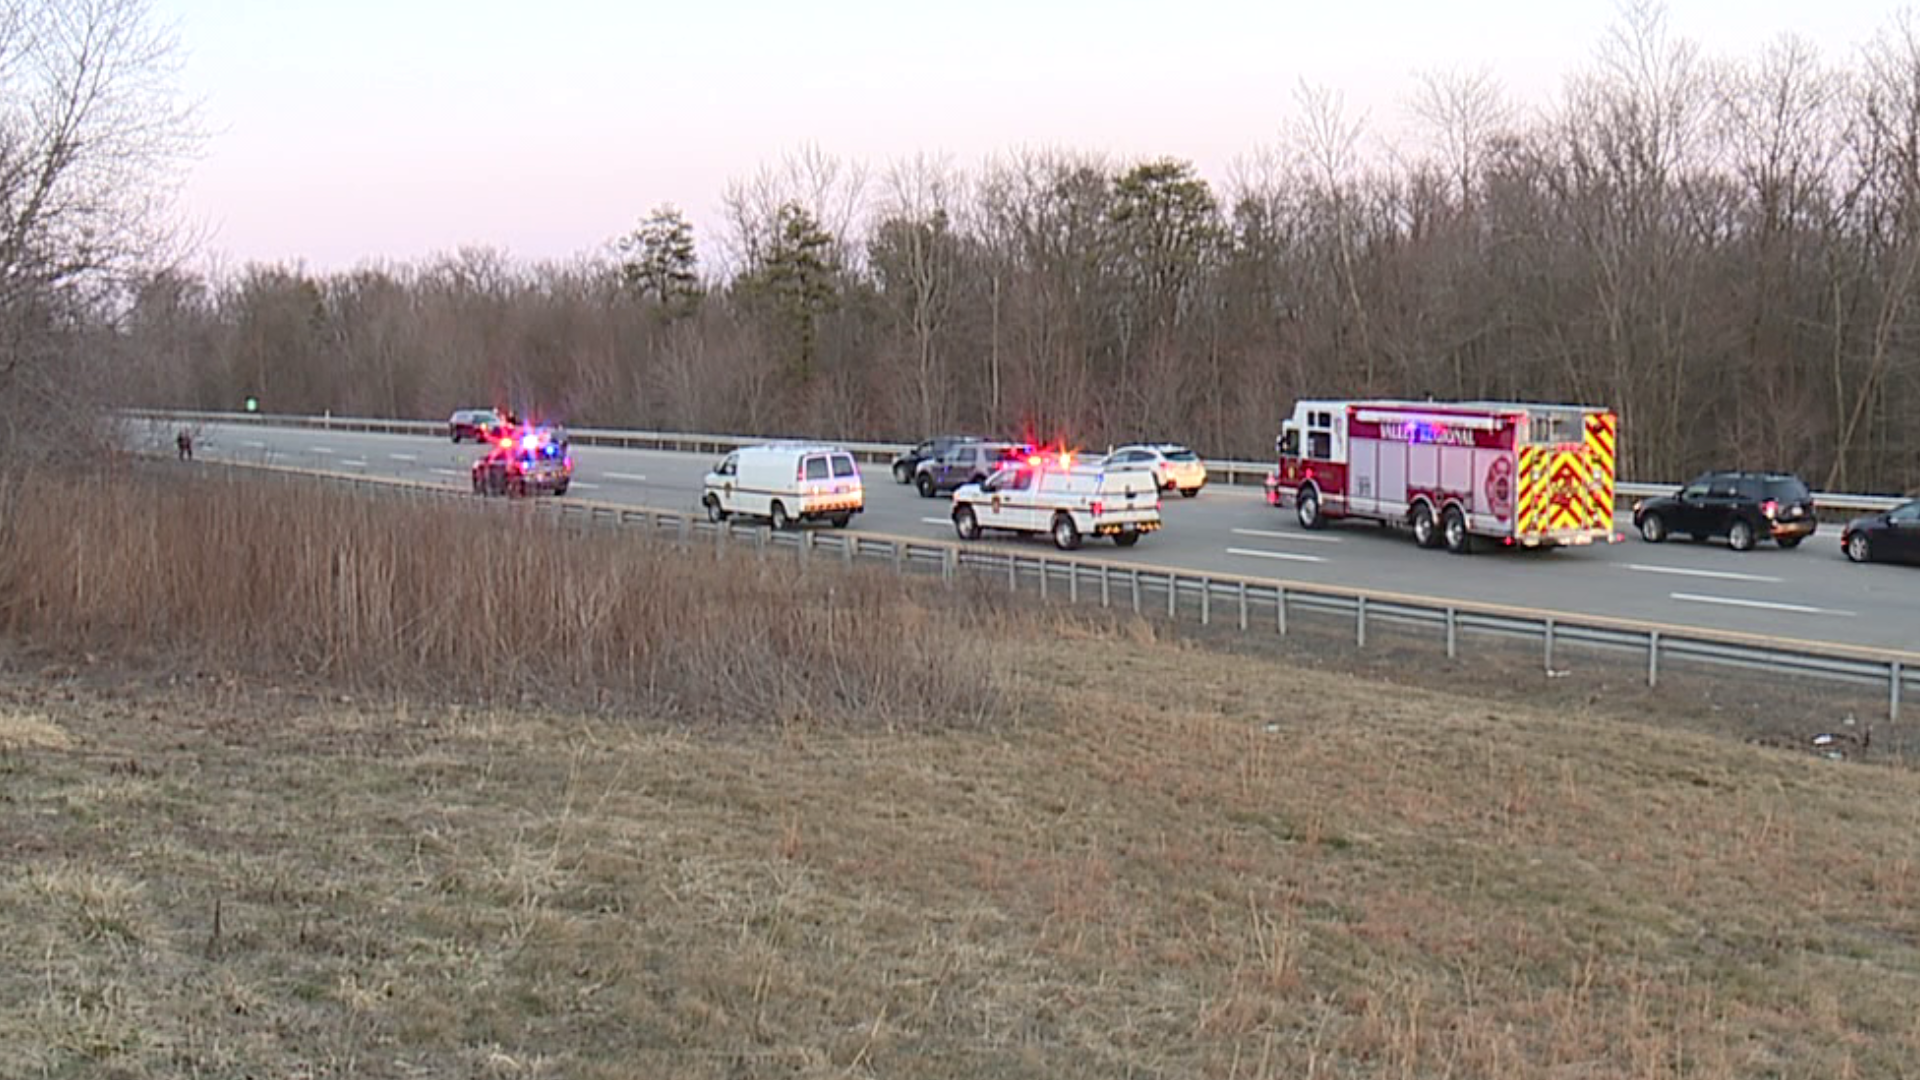 The coroner was called to the scene of a crash on Interstate 81 on Sunday evening.